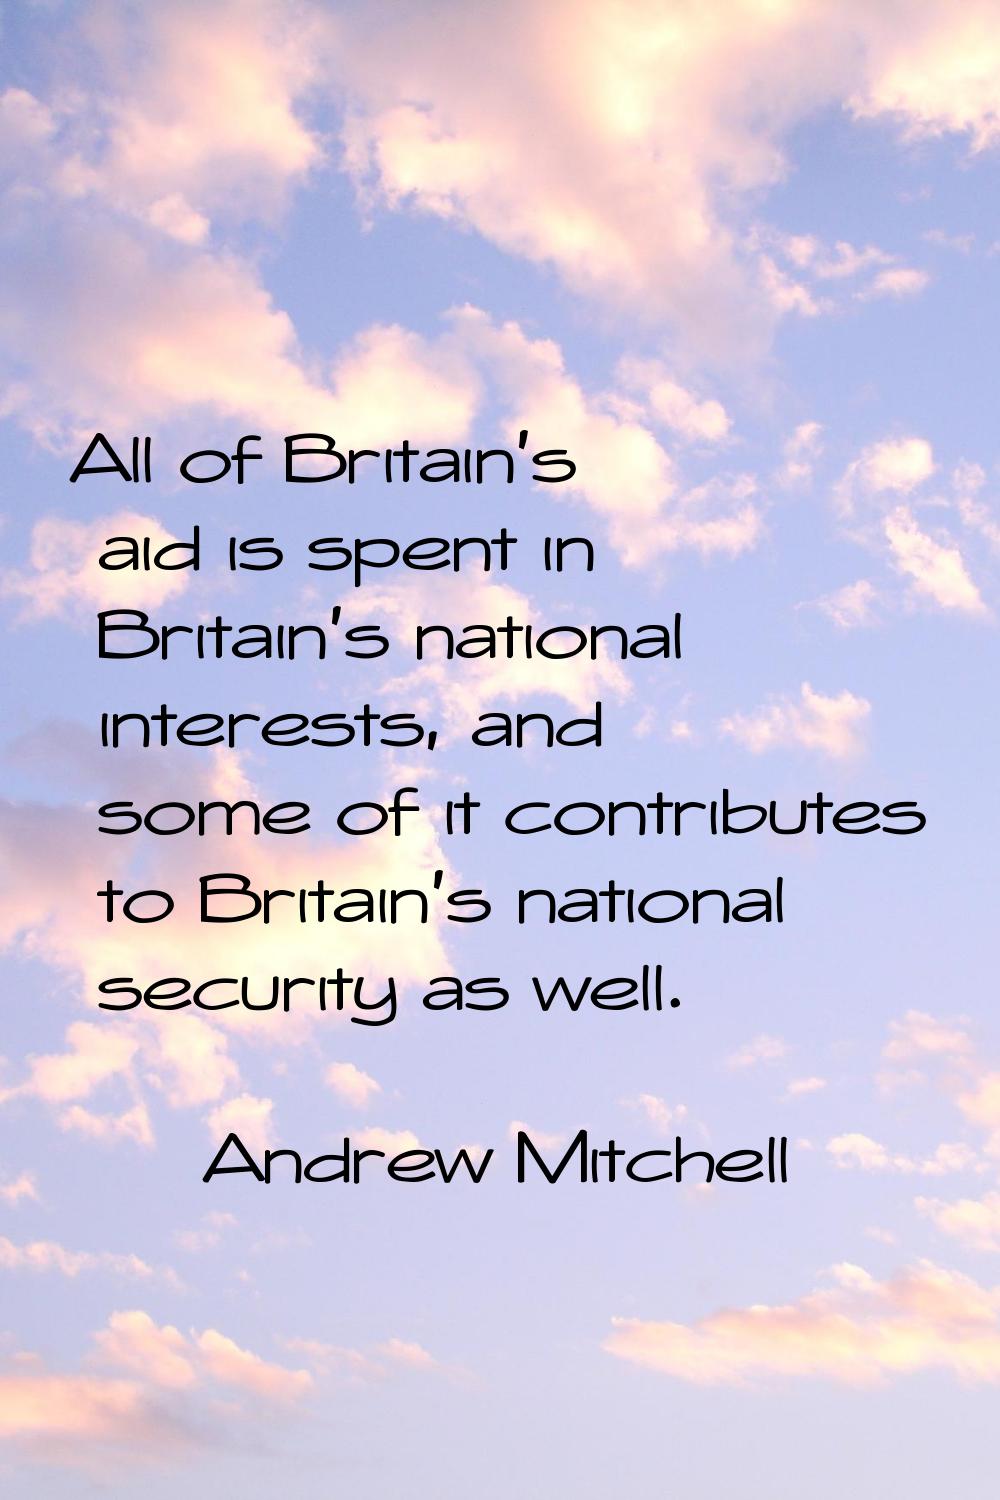 All of Britain's aid is spent in Britain's national interests, and some of it contributes to Britai